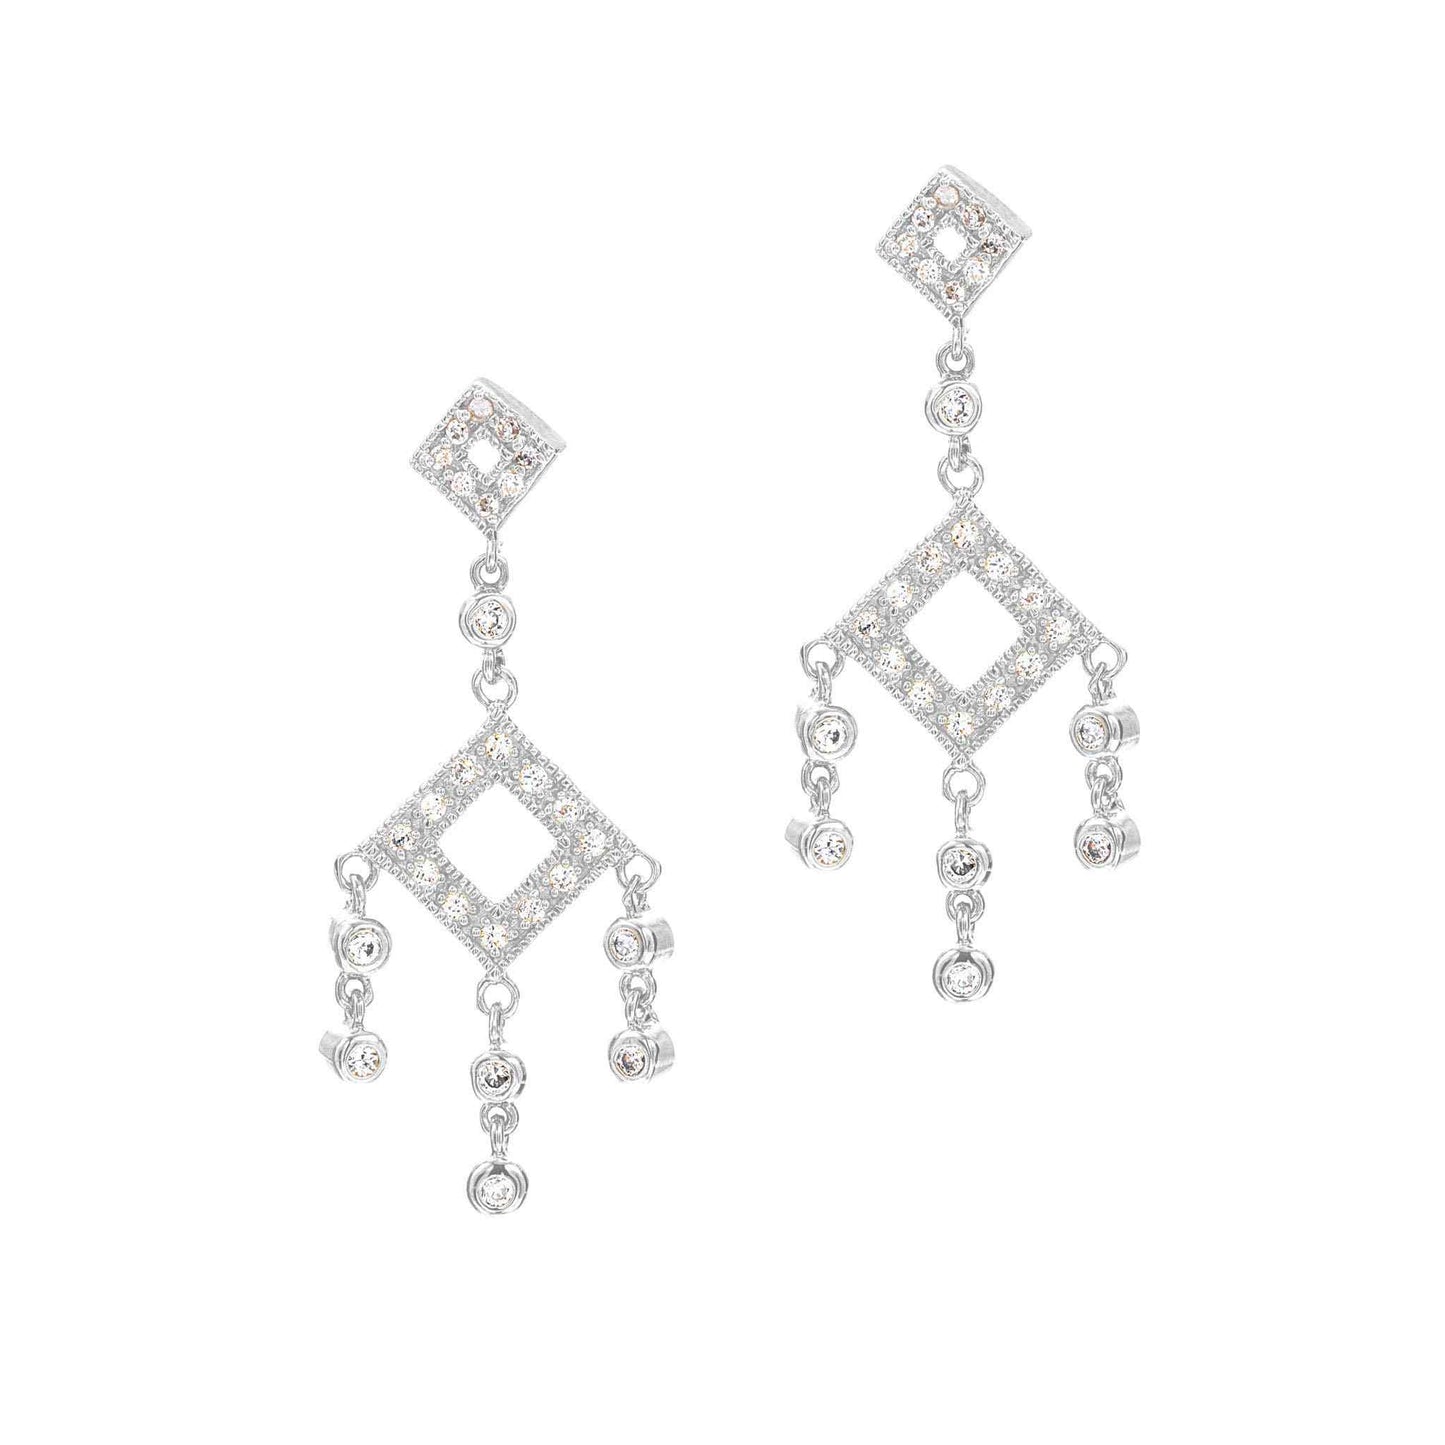 A princess cut sapphire chandelier earrings displayed on a neutral white background.